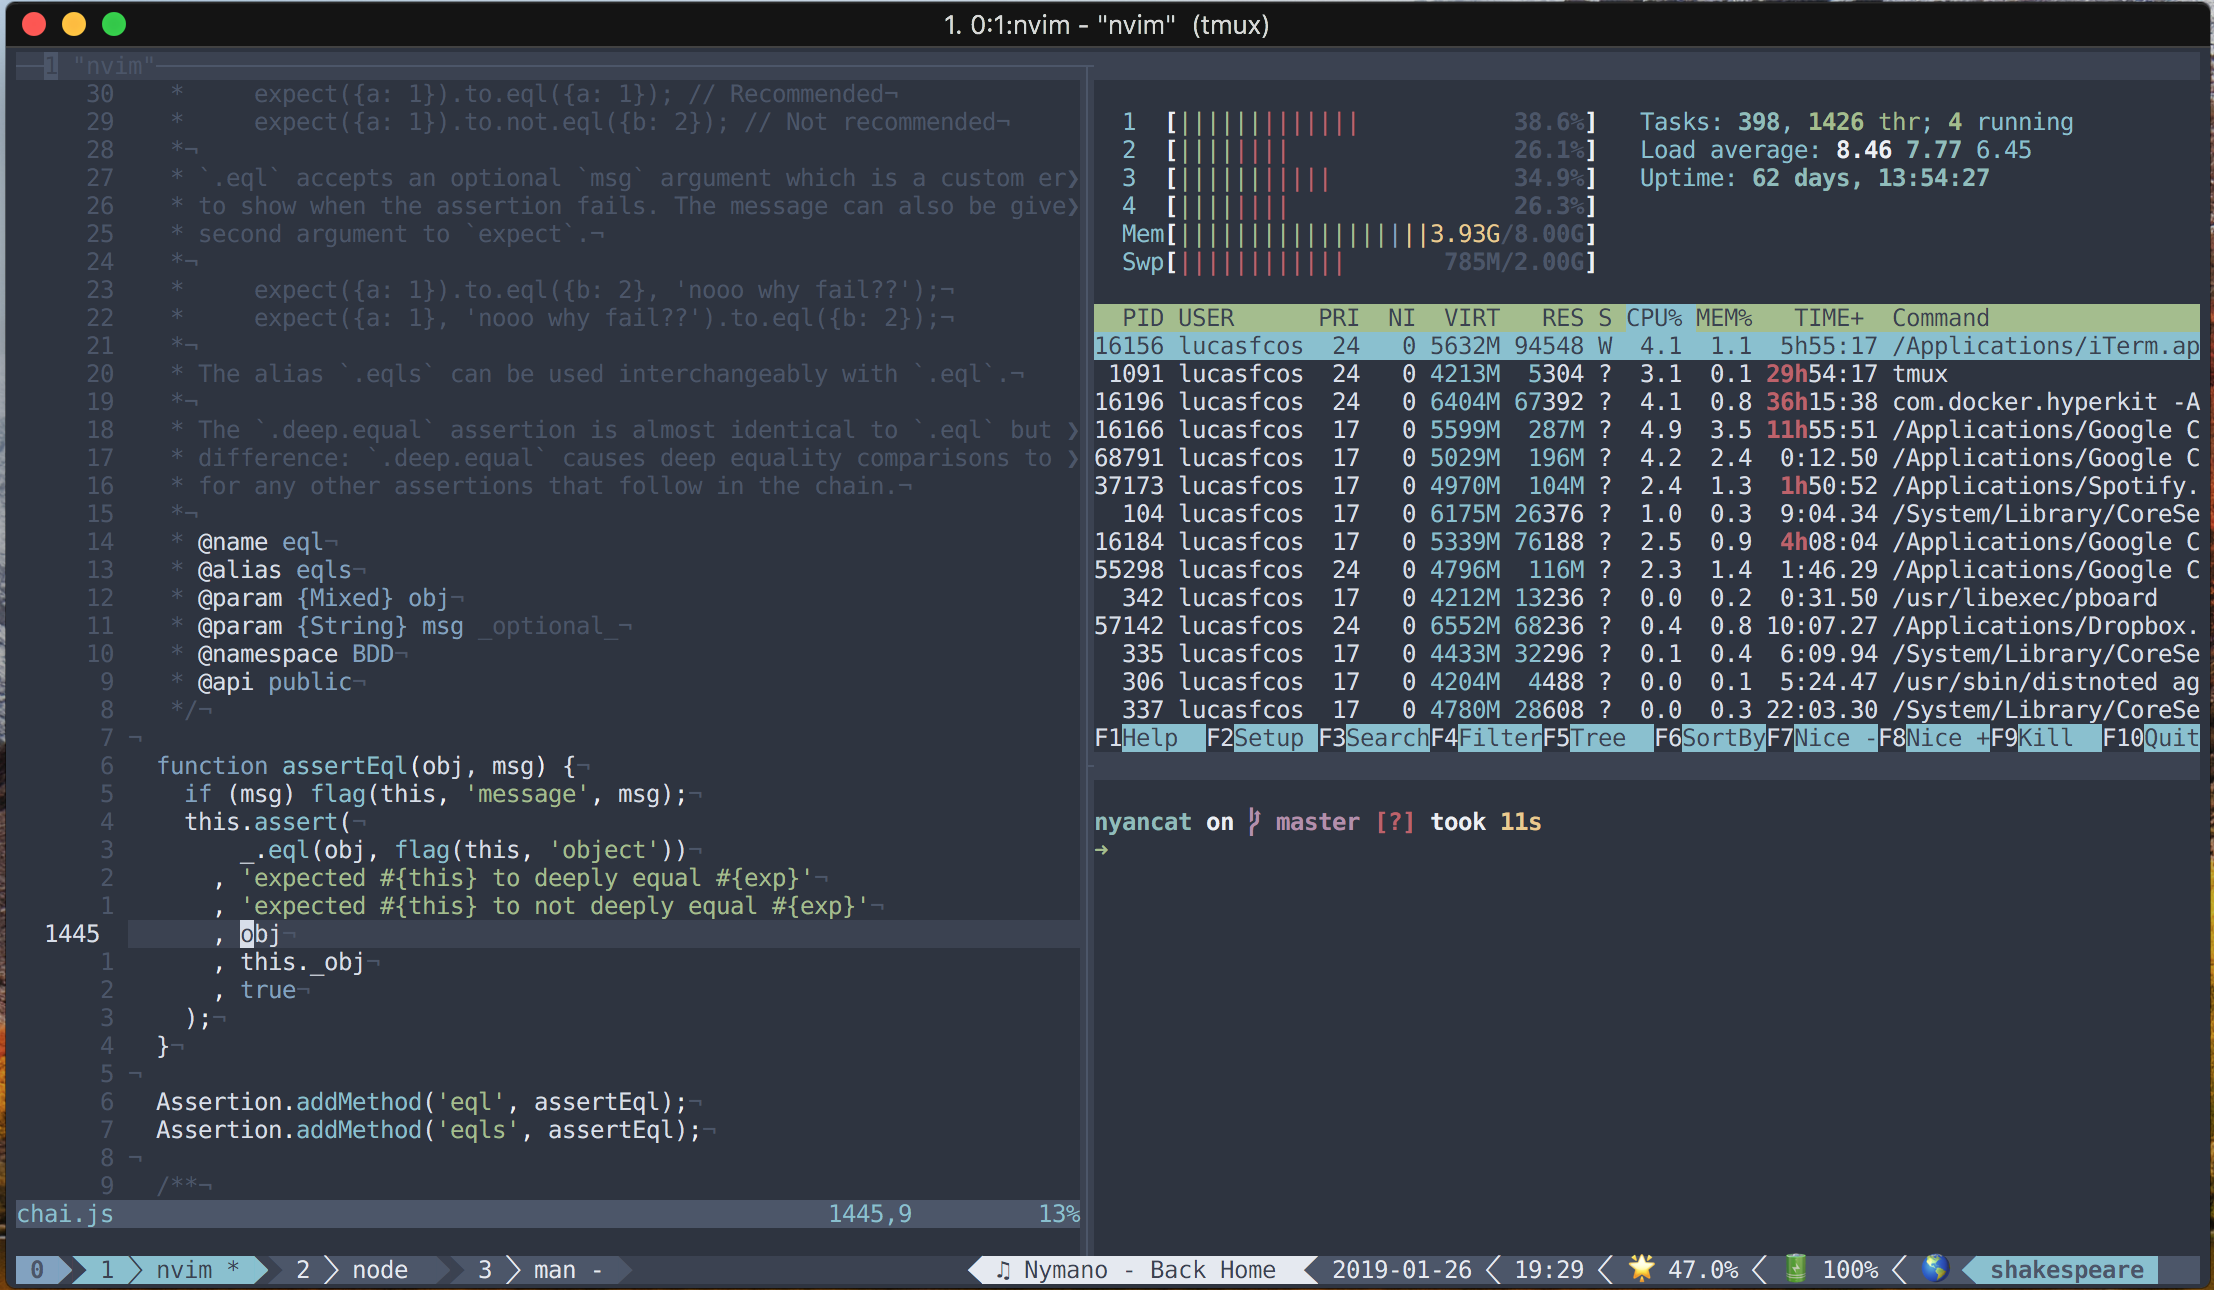 An image from my terminal showing three panes. My text editor (`vim`), htop and a blank pane.